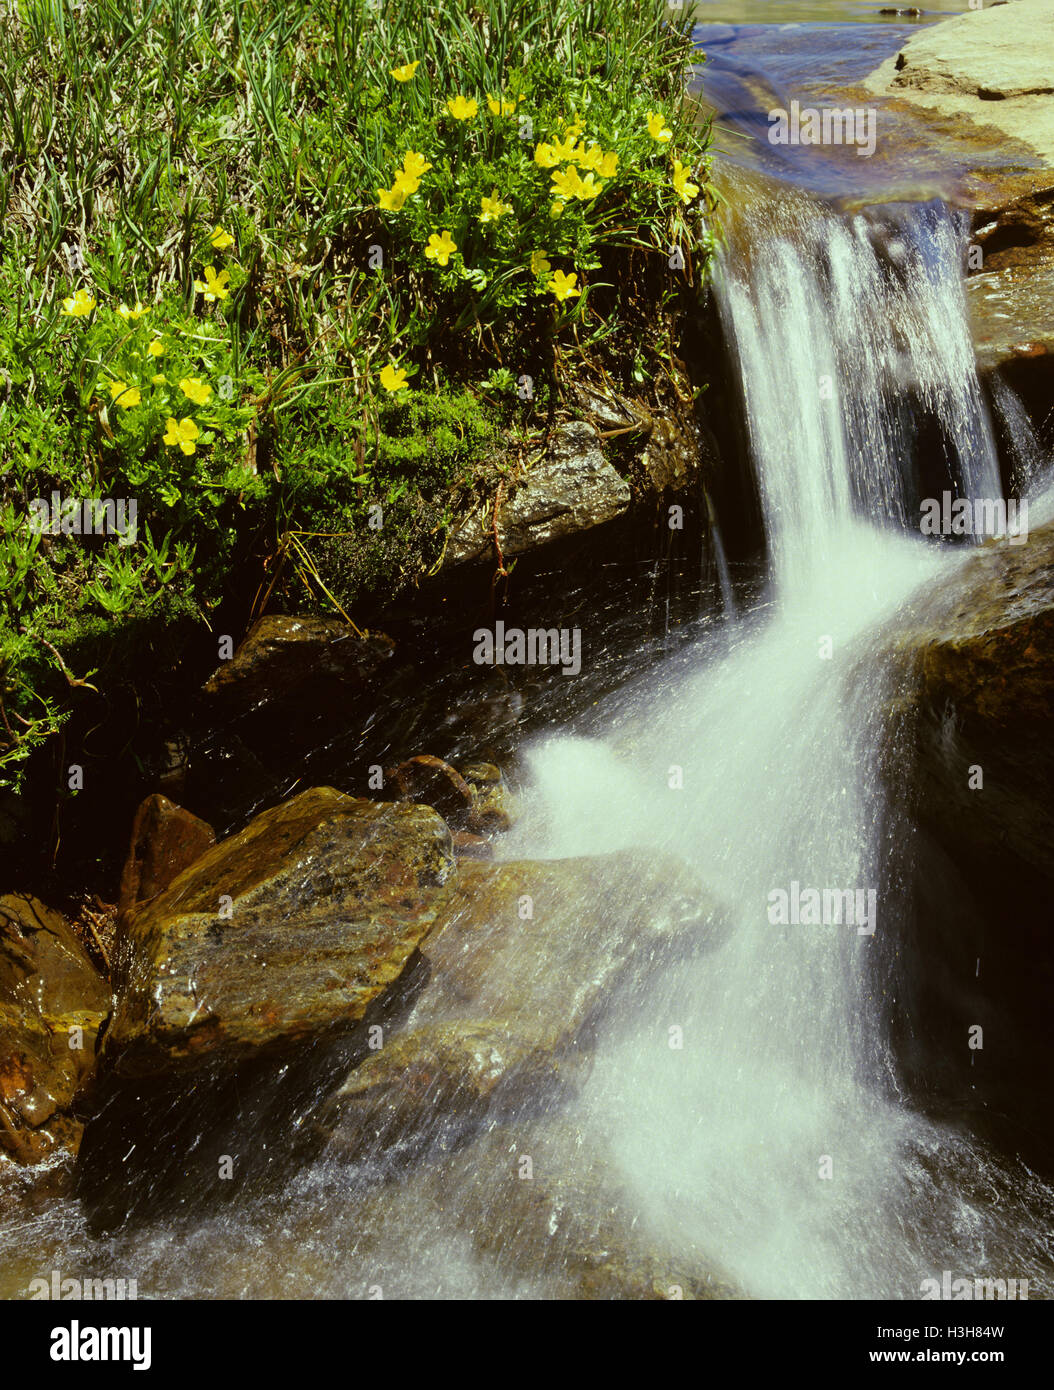 Small creek flowing strongly with meltwater. Stock Photo